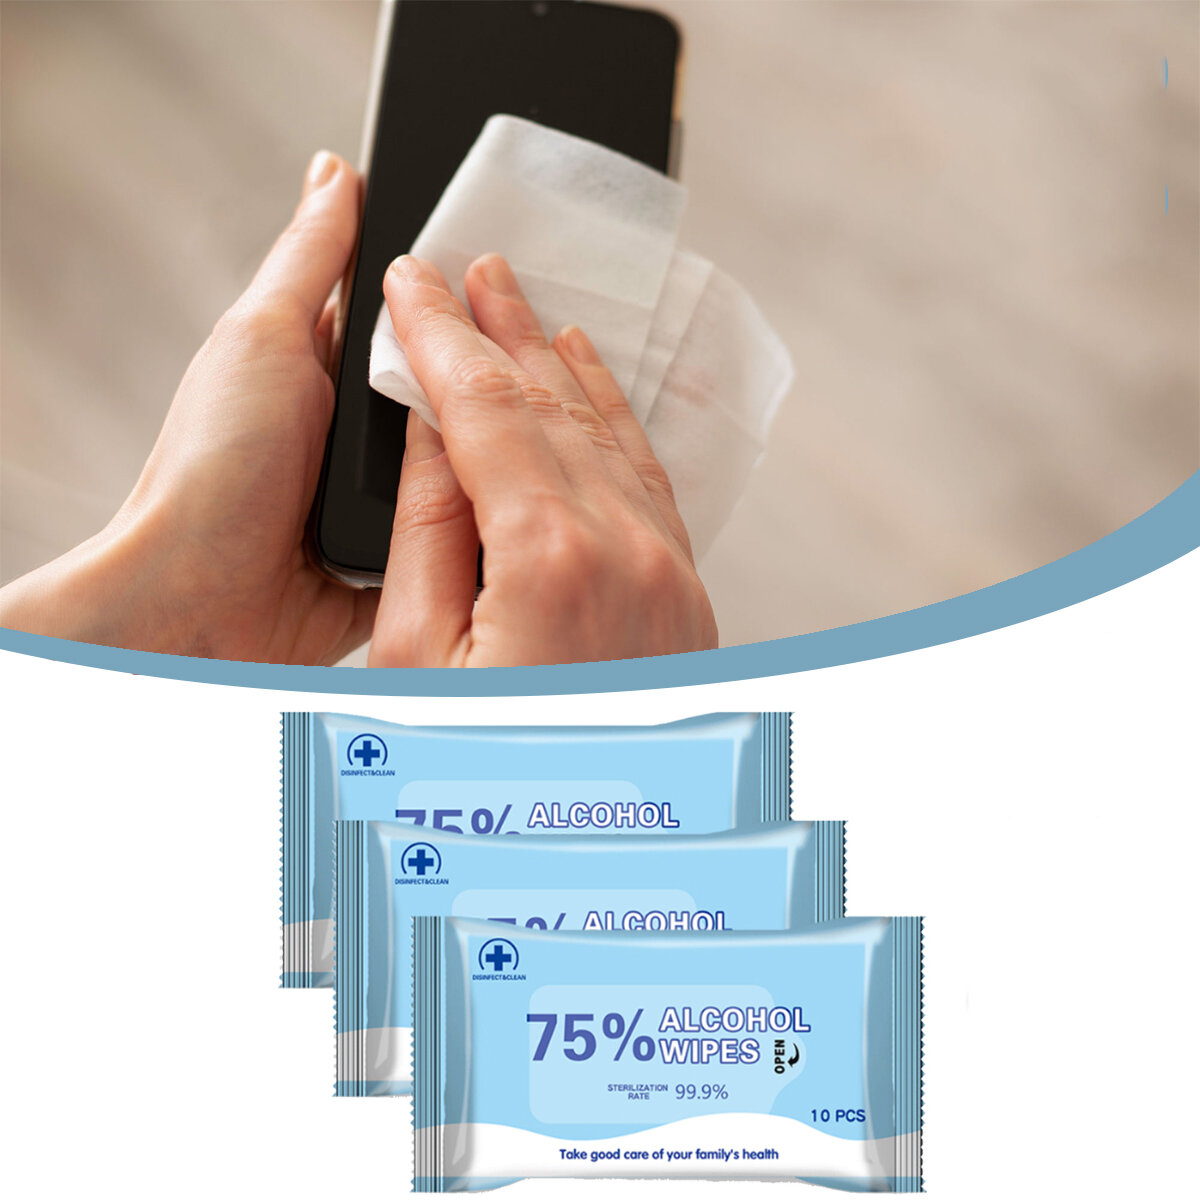 

10pcs 75% Alcohol Sterilization Wipes Cleaning Wet Wipes Disposable Wipes for Office Home School Swab